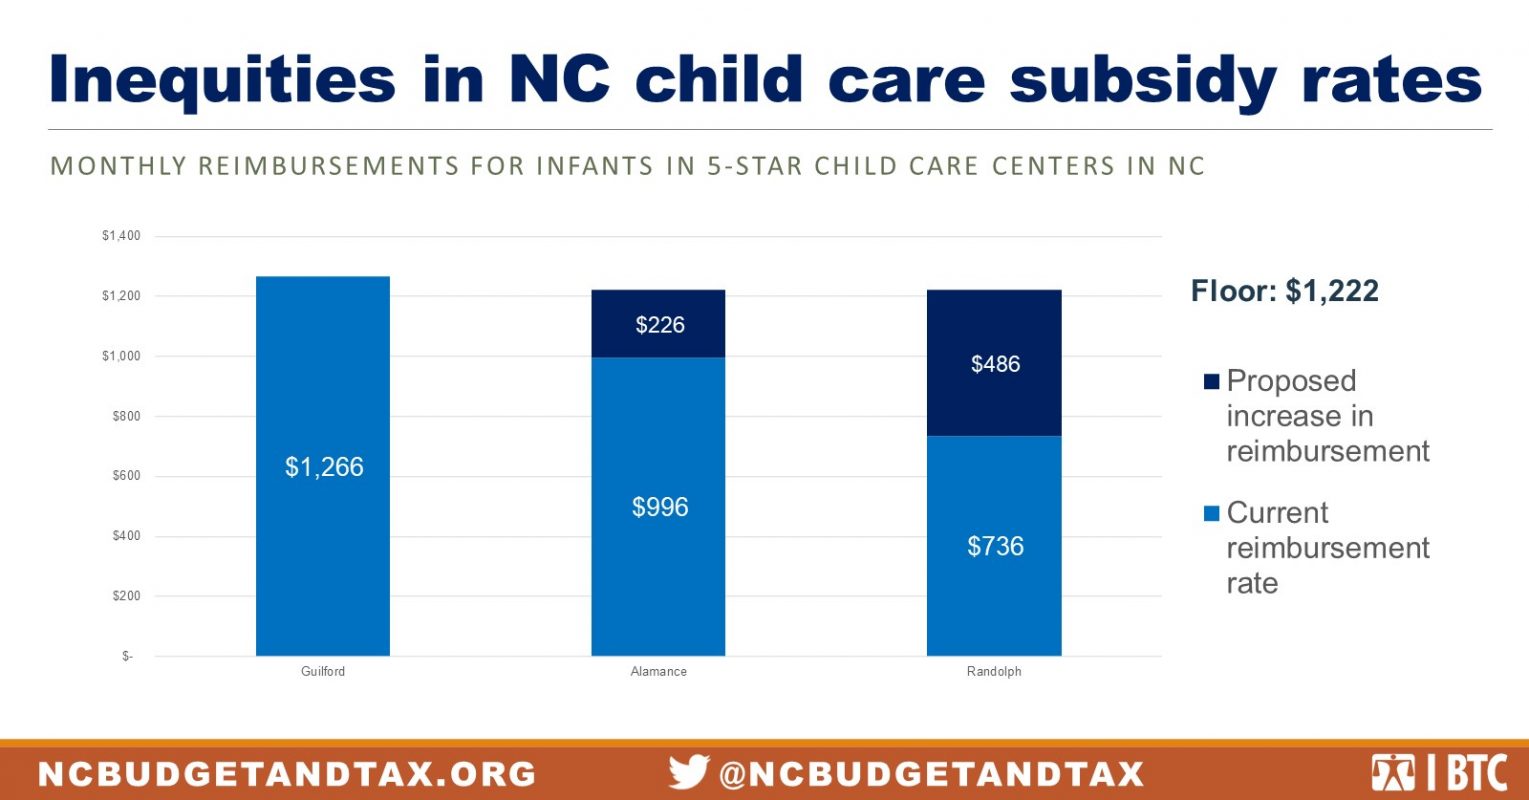 House Bill 574 Increasing childcare subsidy rates will stabilize